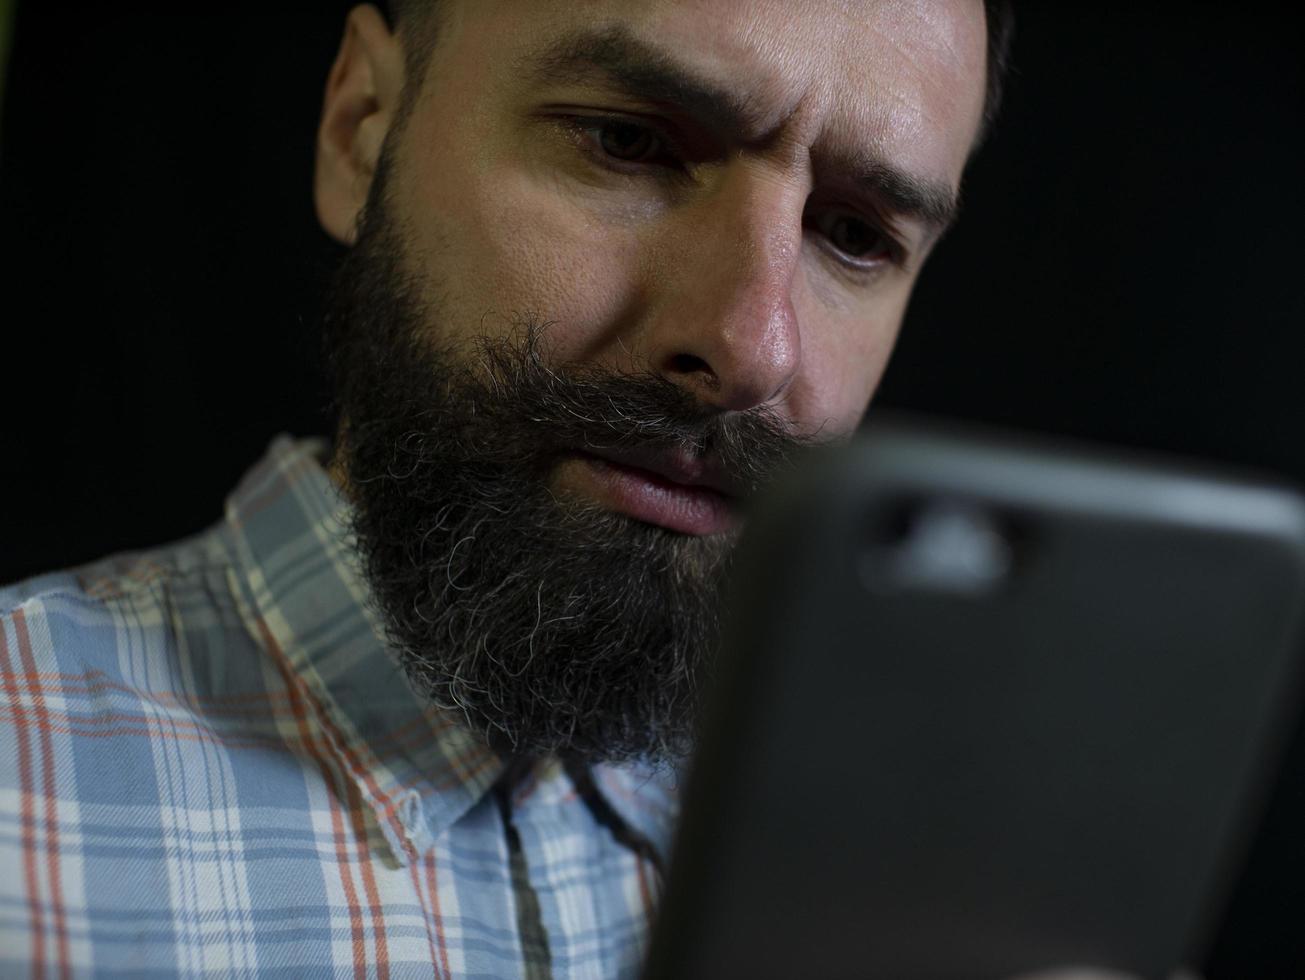 stylish man with a beard and mustache looks at a mobile phone photo